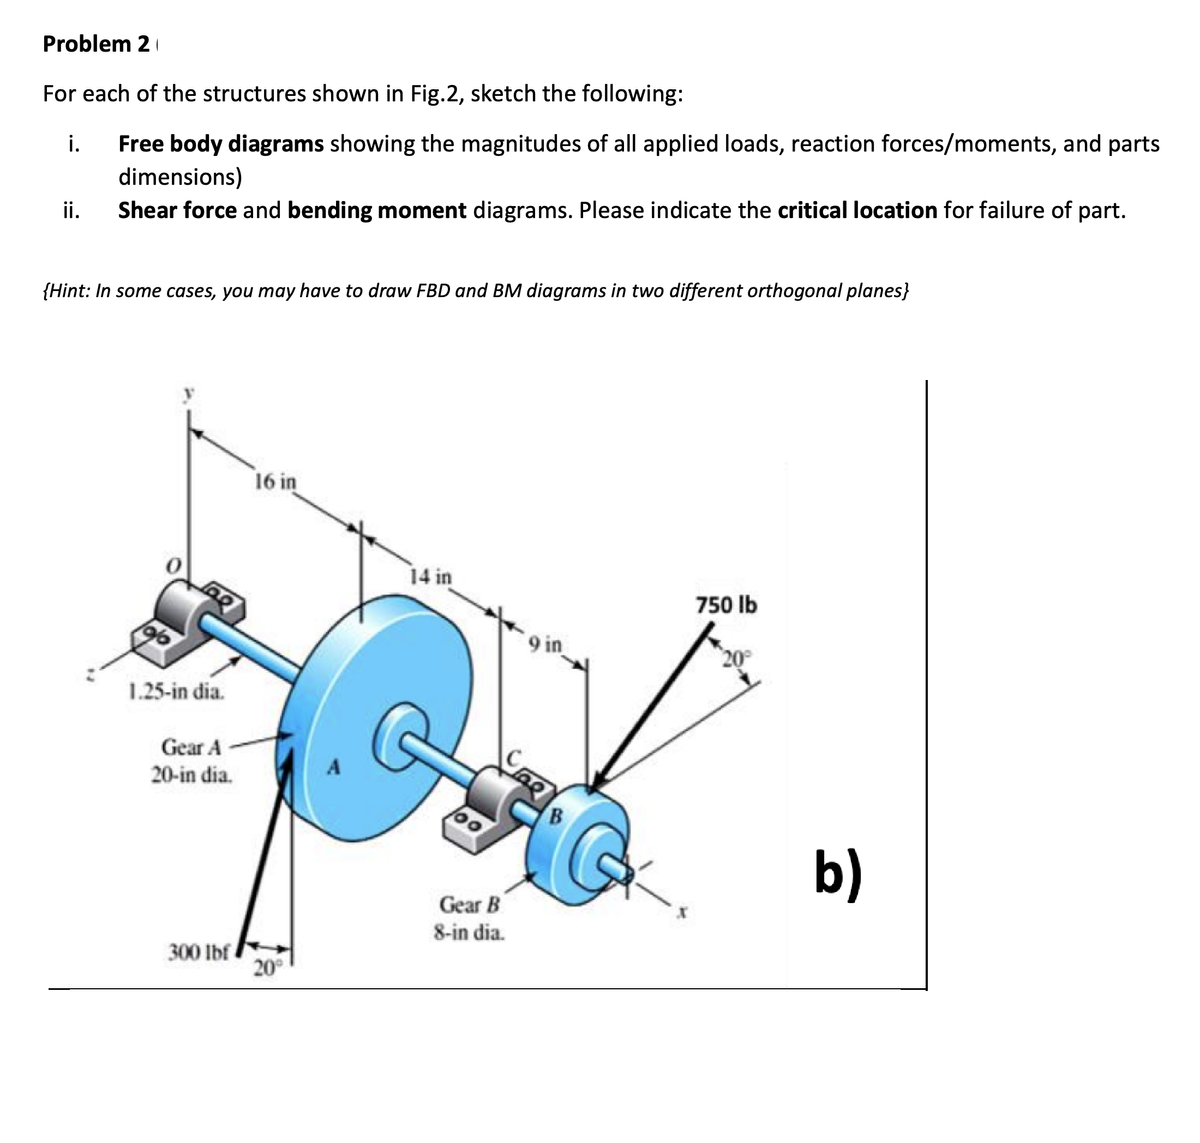 Problem 2
For each of the structures shown in Fig.2, sketch the following:
Free body diagrams showing the magnitudes of all applied loads, reaction forces/moments, and parts
dimensions)
Shear force and bending moment diagrams. Please indicate the critical location for failure of part.
i.
ii.
{Hint: In some cases, you may have to draw FBD and BM diagrams in two different orthogonal planes}
196
ag
1.25-in dia.
Gear A
20-in dia.
300 lbf
16 in
20⁰
A
14 in
100
Gear B
8-in dia.
9 in
B
750 lb
20°
b)